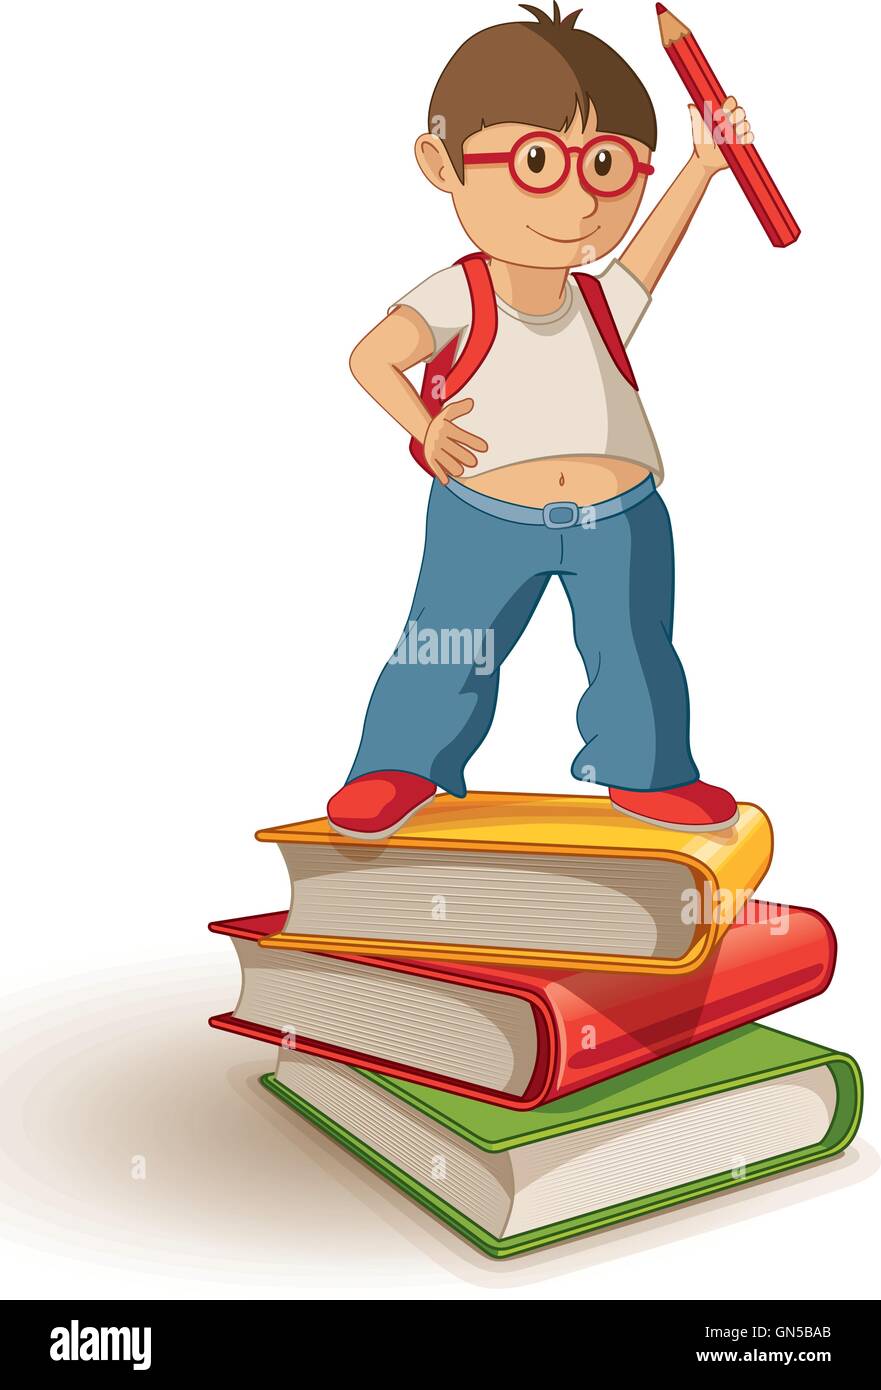 Vector illustration of a school boy standing and holding a red pencil on the book stack. Stock Vector